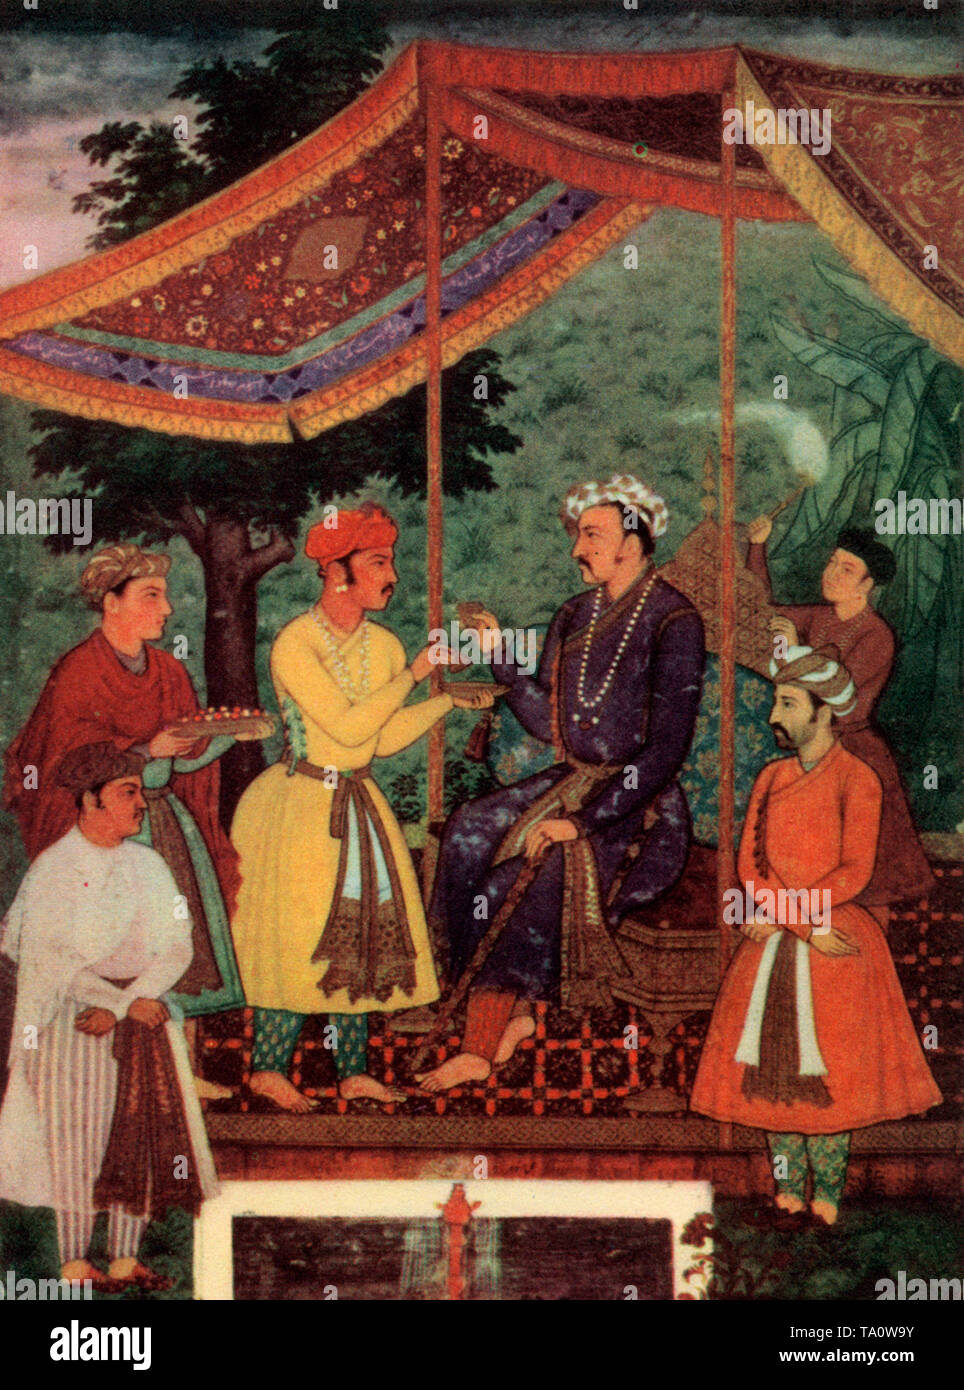 Jahangir drinking wine under a canopy, c1610. By Manohar, 17th century. Jahangir (1569-1627) originally Salim, a Mogul Emperor (from 1605), drinking wine under a canopy, c1610. A painting by Manohar. Manohar's career began under the reign of Jahangir's father, Akbar (reigned 1556-1605). Manohar is known to have made more than ten portraits. Stock Photo